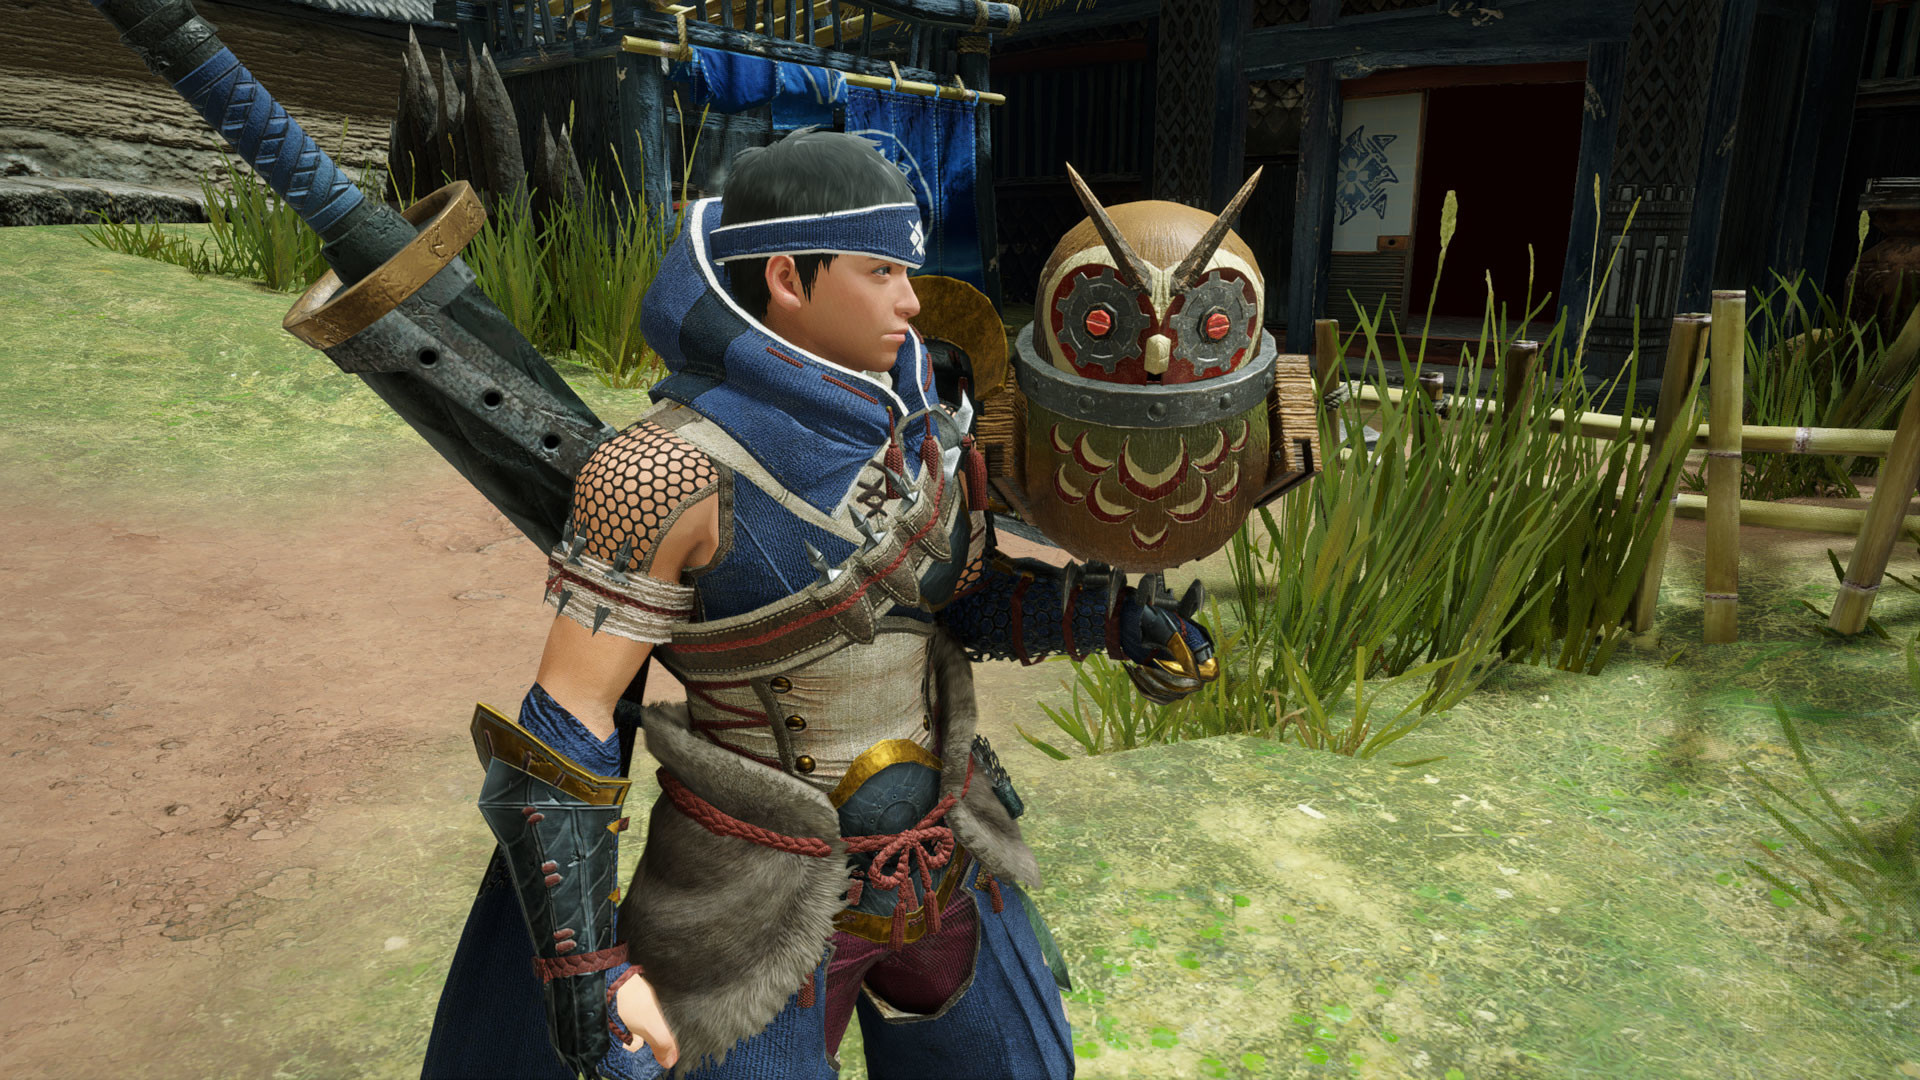 MONSTER HUNTER RISE - "Wind-up Cohoot" Cohoot outfit Featured Screenshot #1